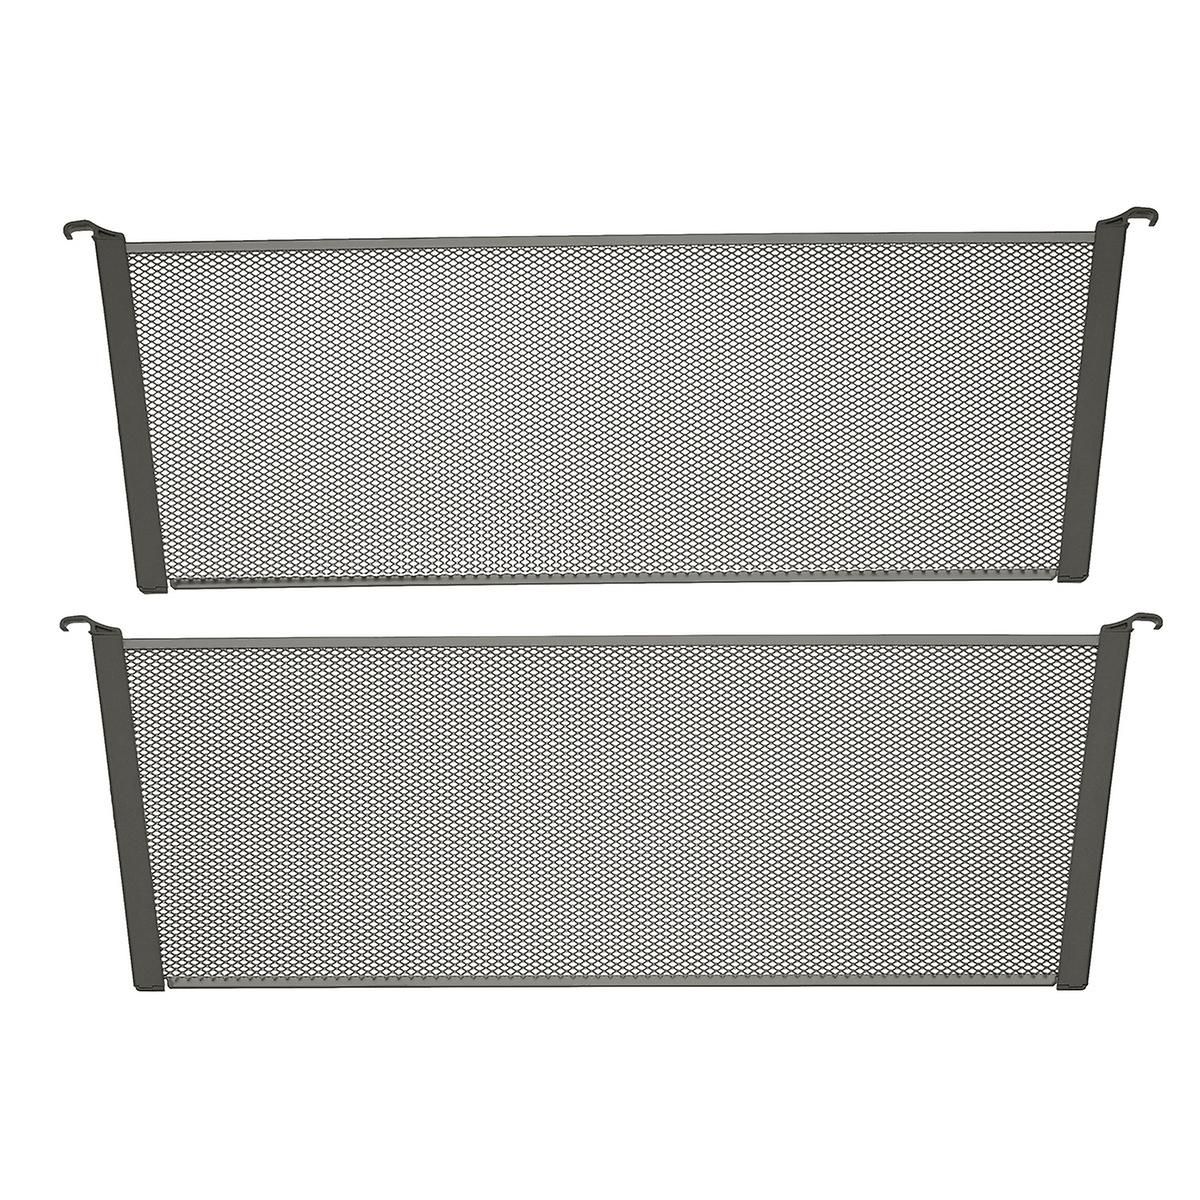 Elfa Graphite 20-3/4" Mesh Drawer Dividers | The Container Store